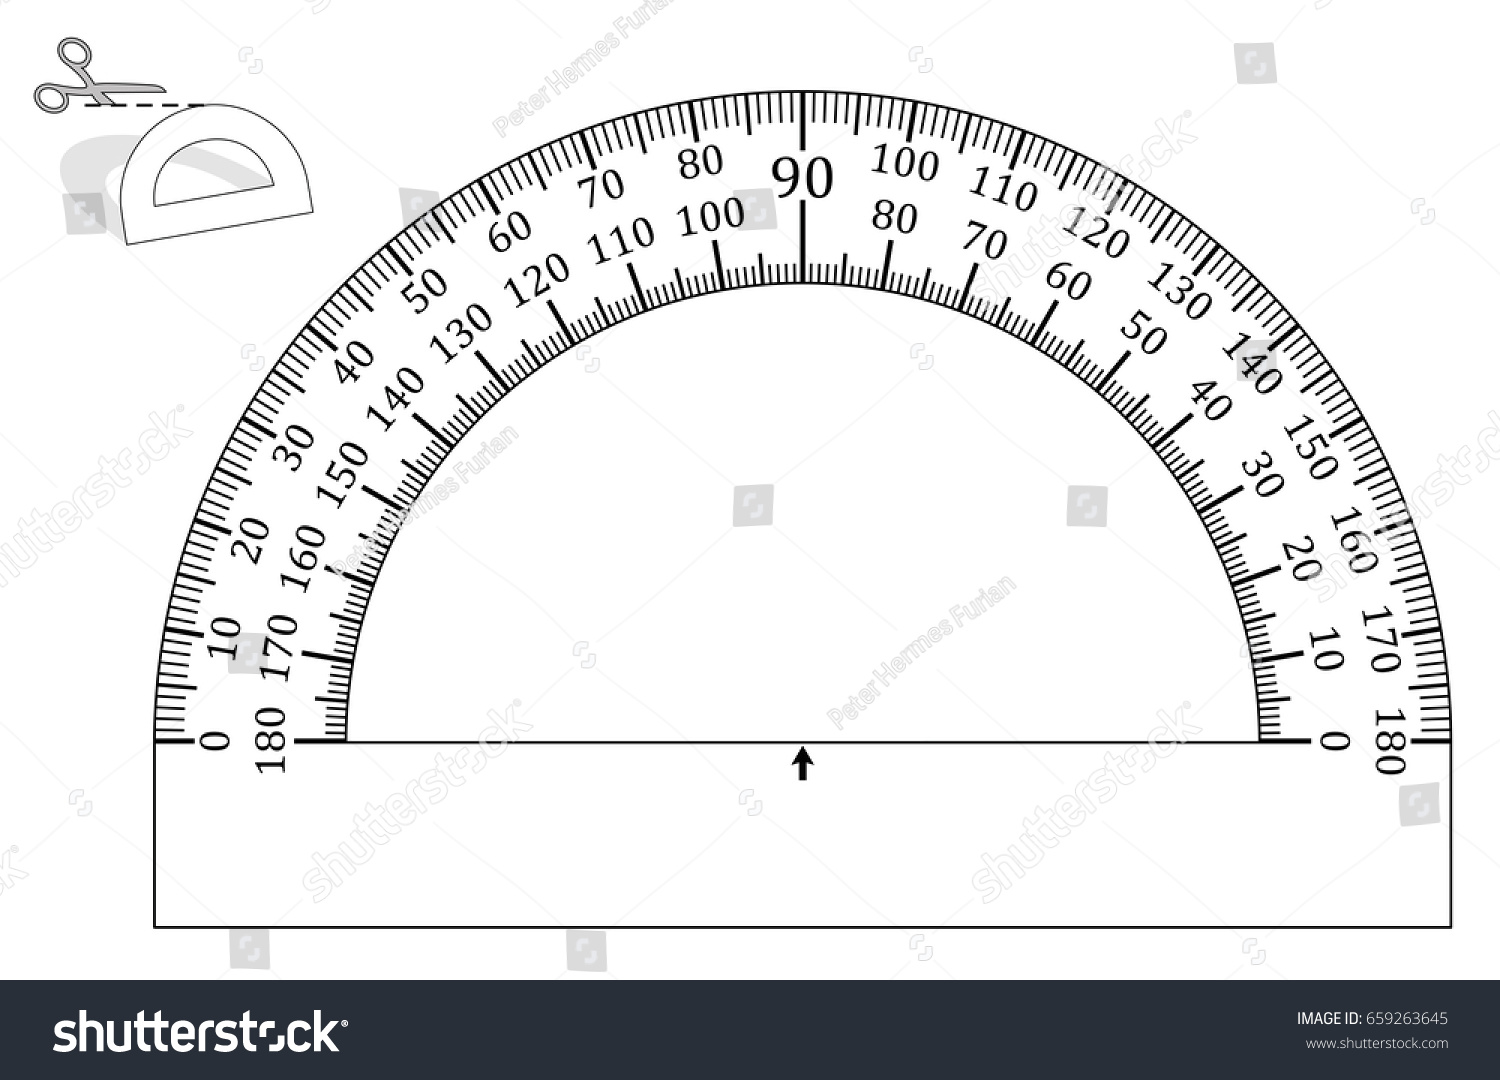 Protractor Paper Model Cut Out Print Royalty Free Stock Image